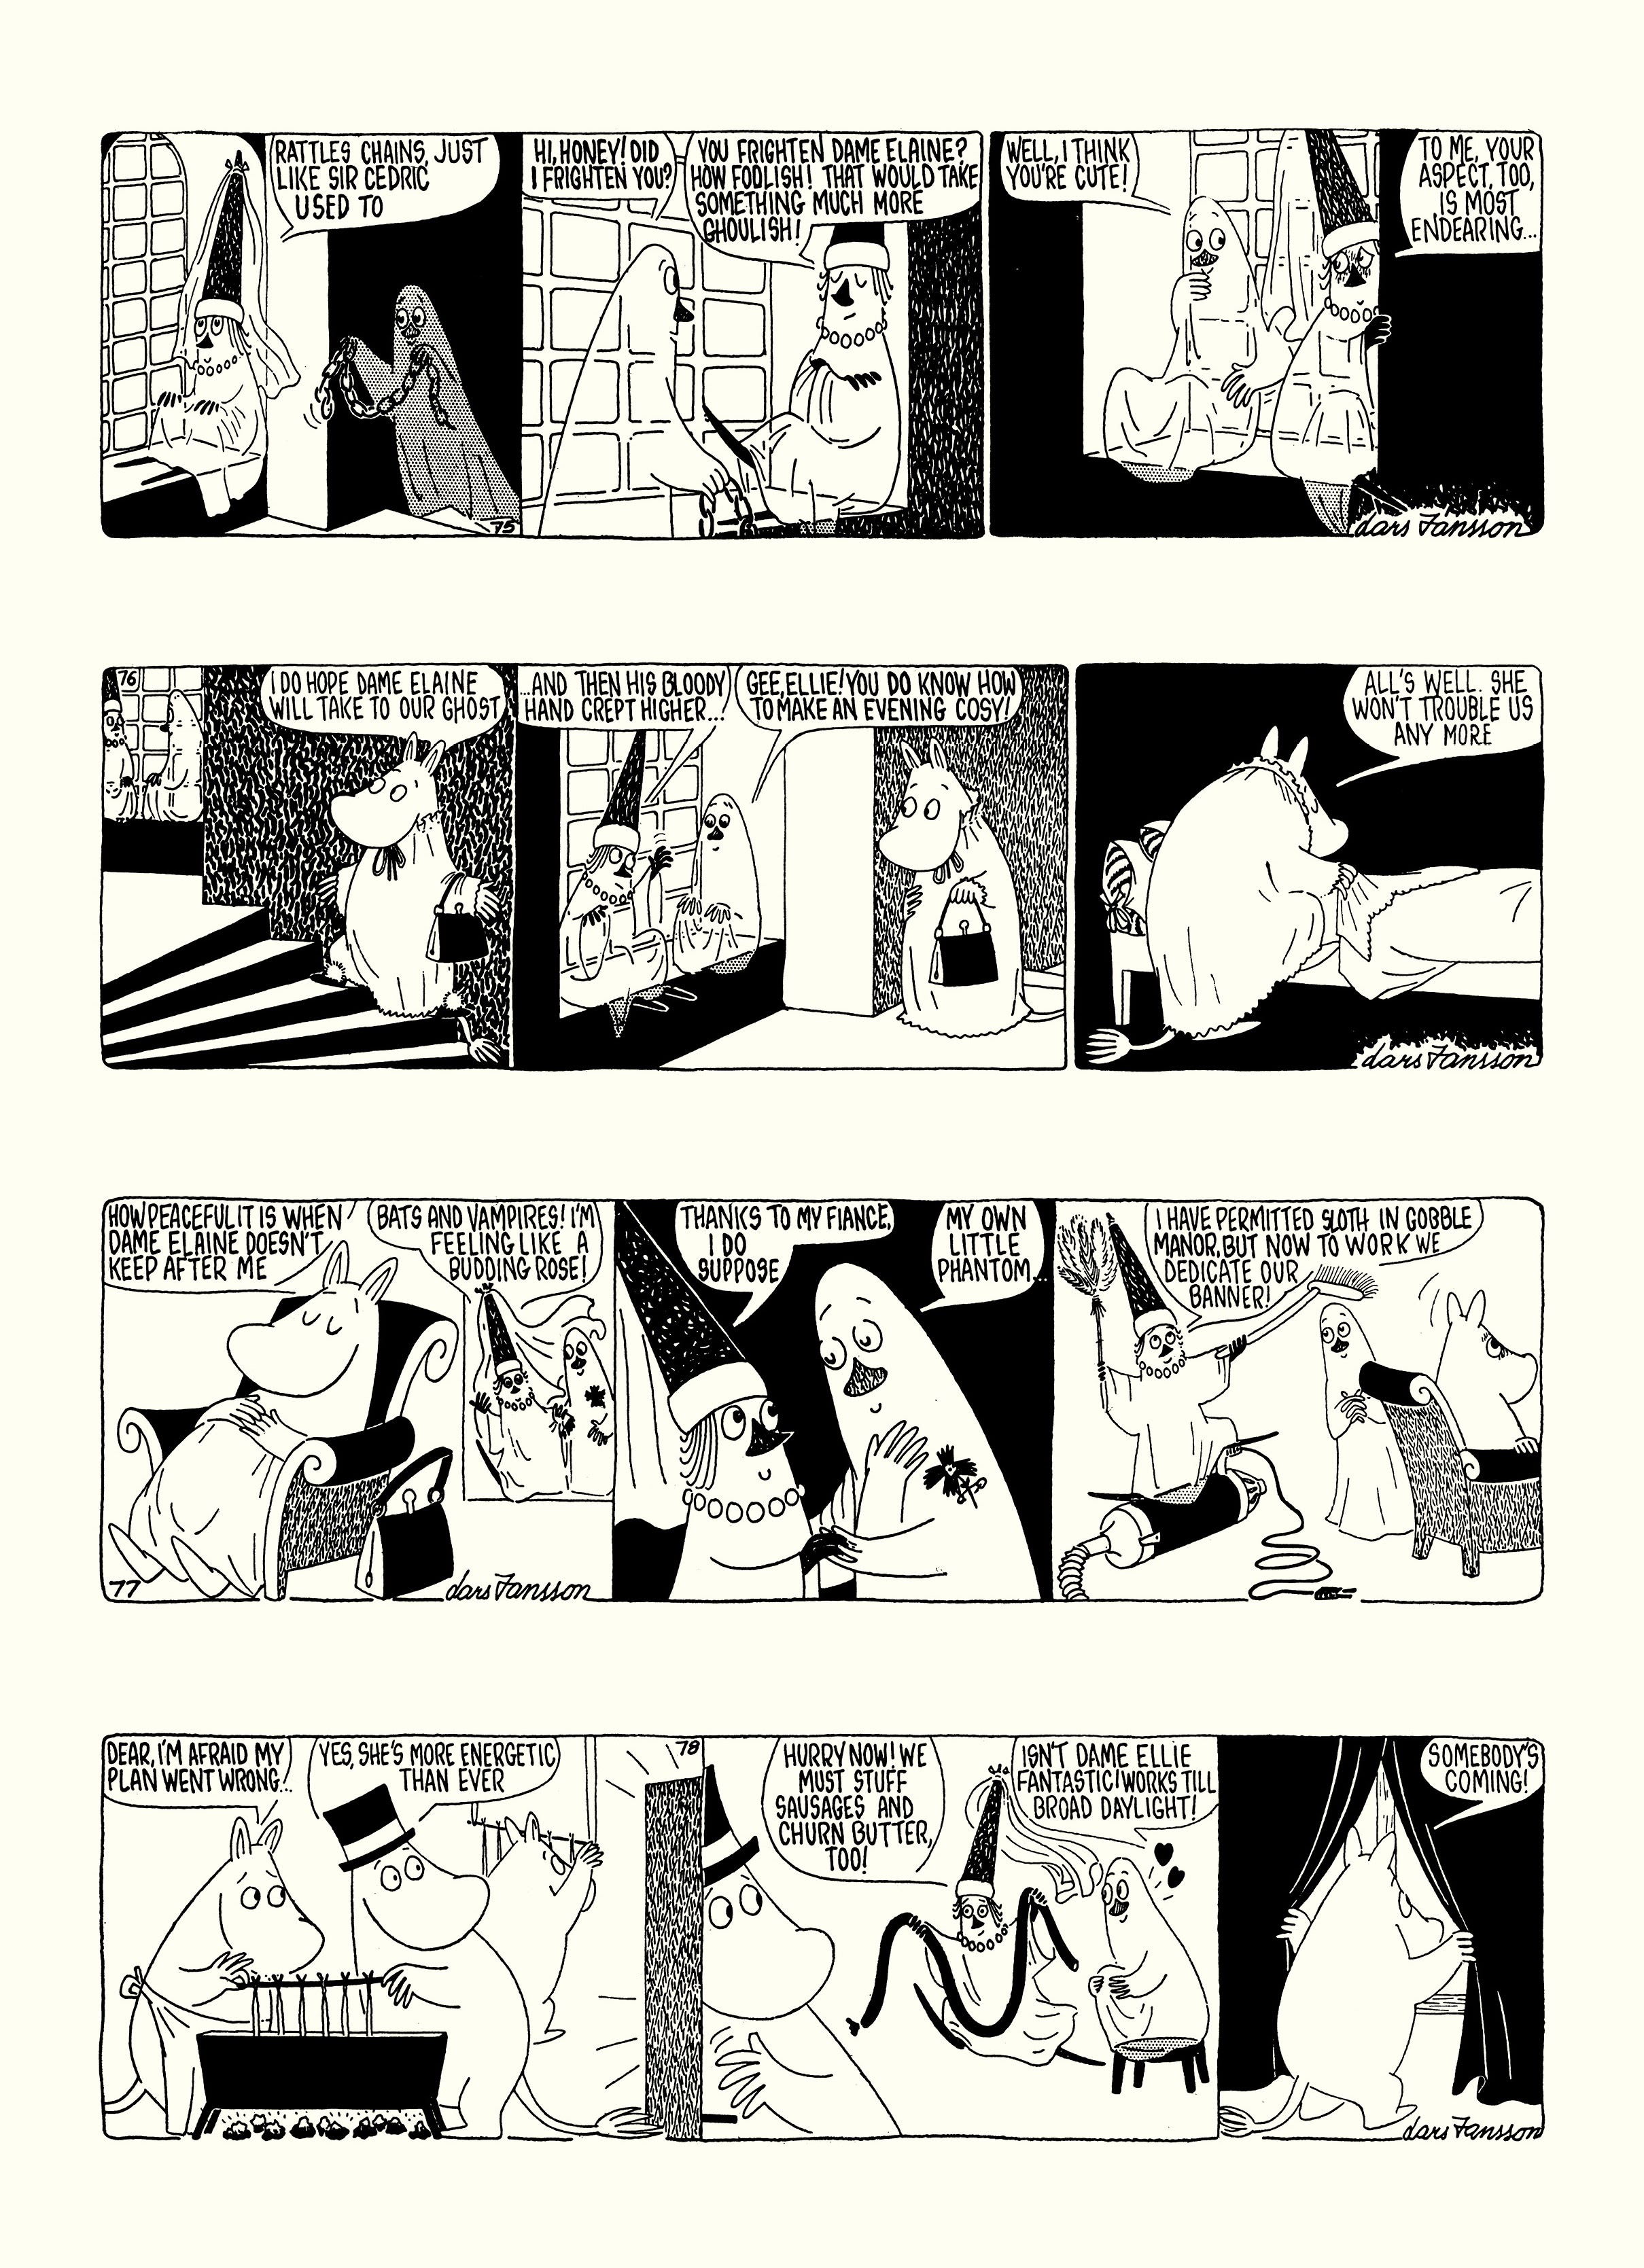 Read online Moomin: The Complete Lars Jansson Comic Strip comic -  Issue # TPB 7 - 67